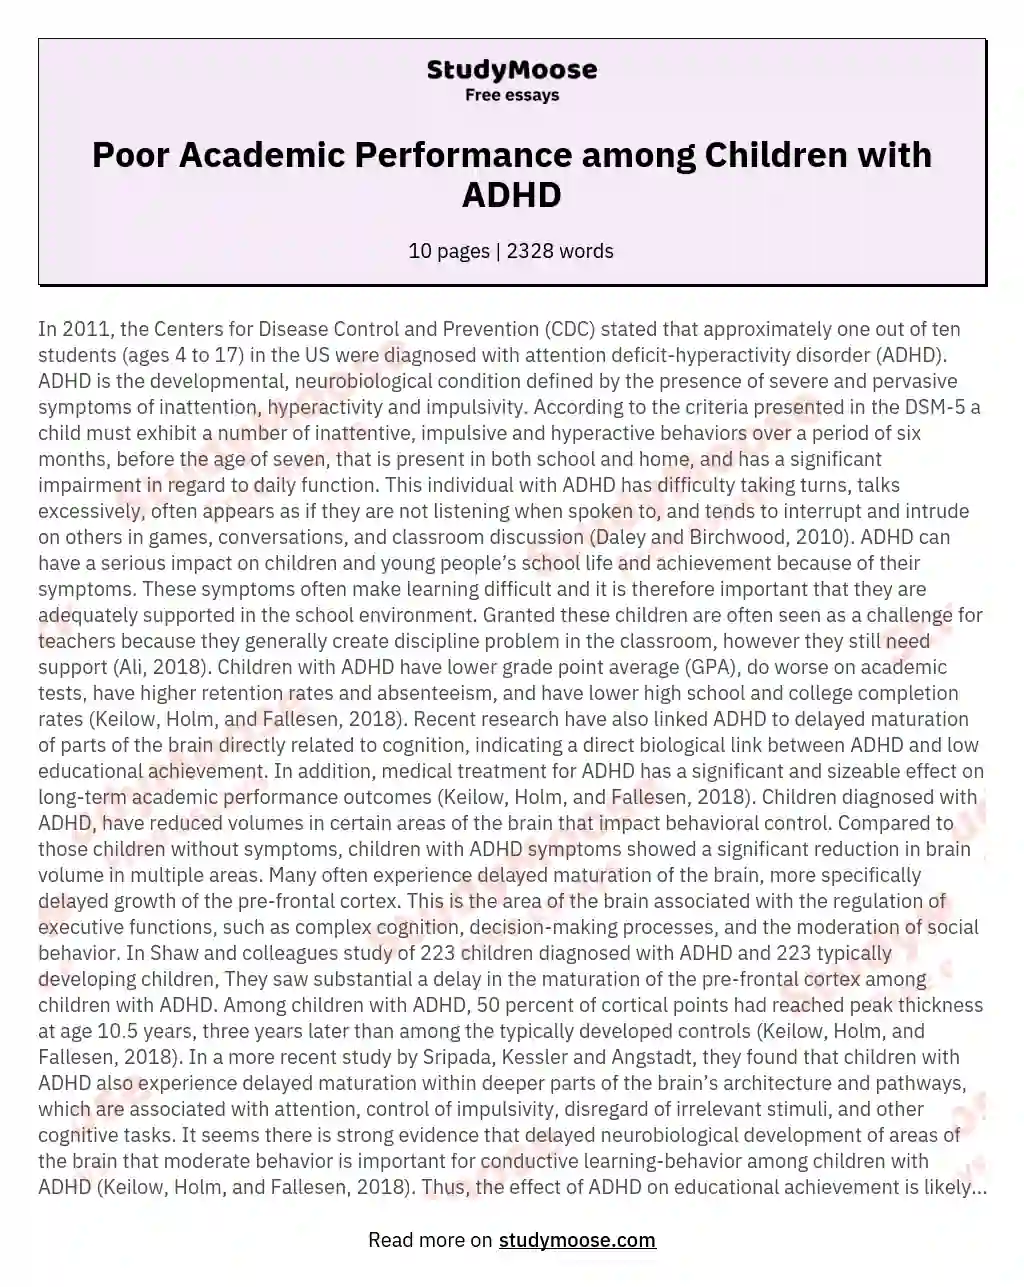 Poor Academic Performance among Children with ADHD essay